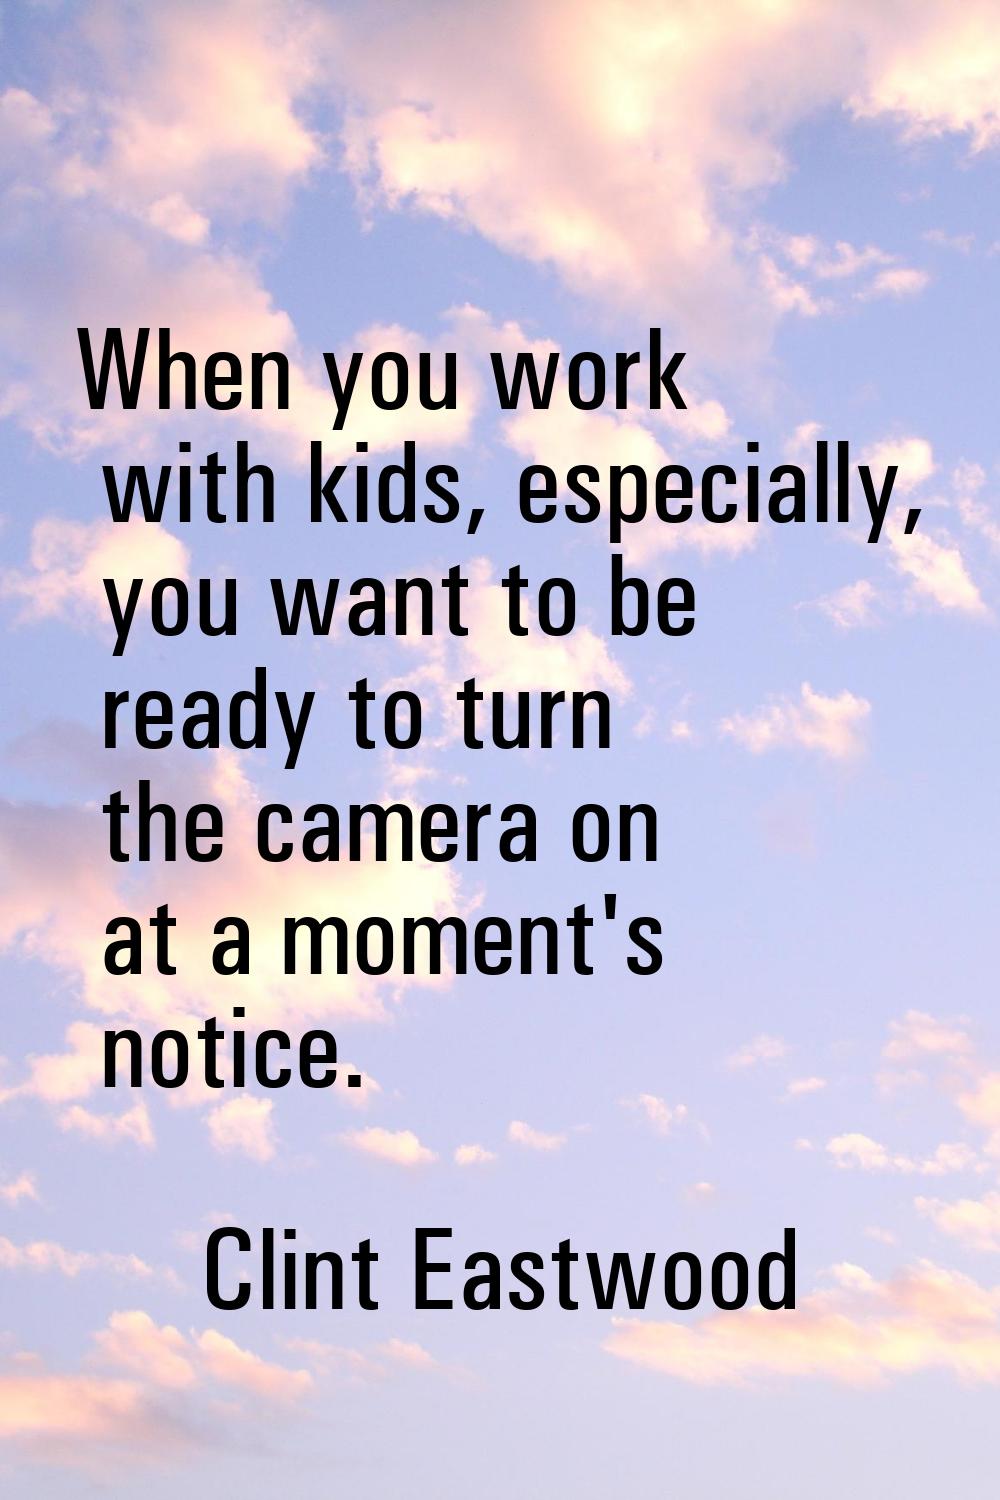 When you work with kids, especially, you want to be ready to turn the camera on at a moment's notic